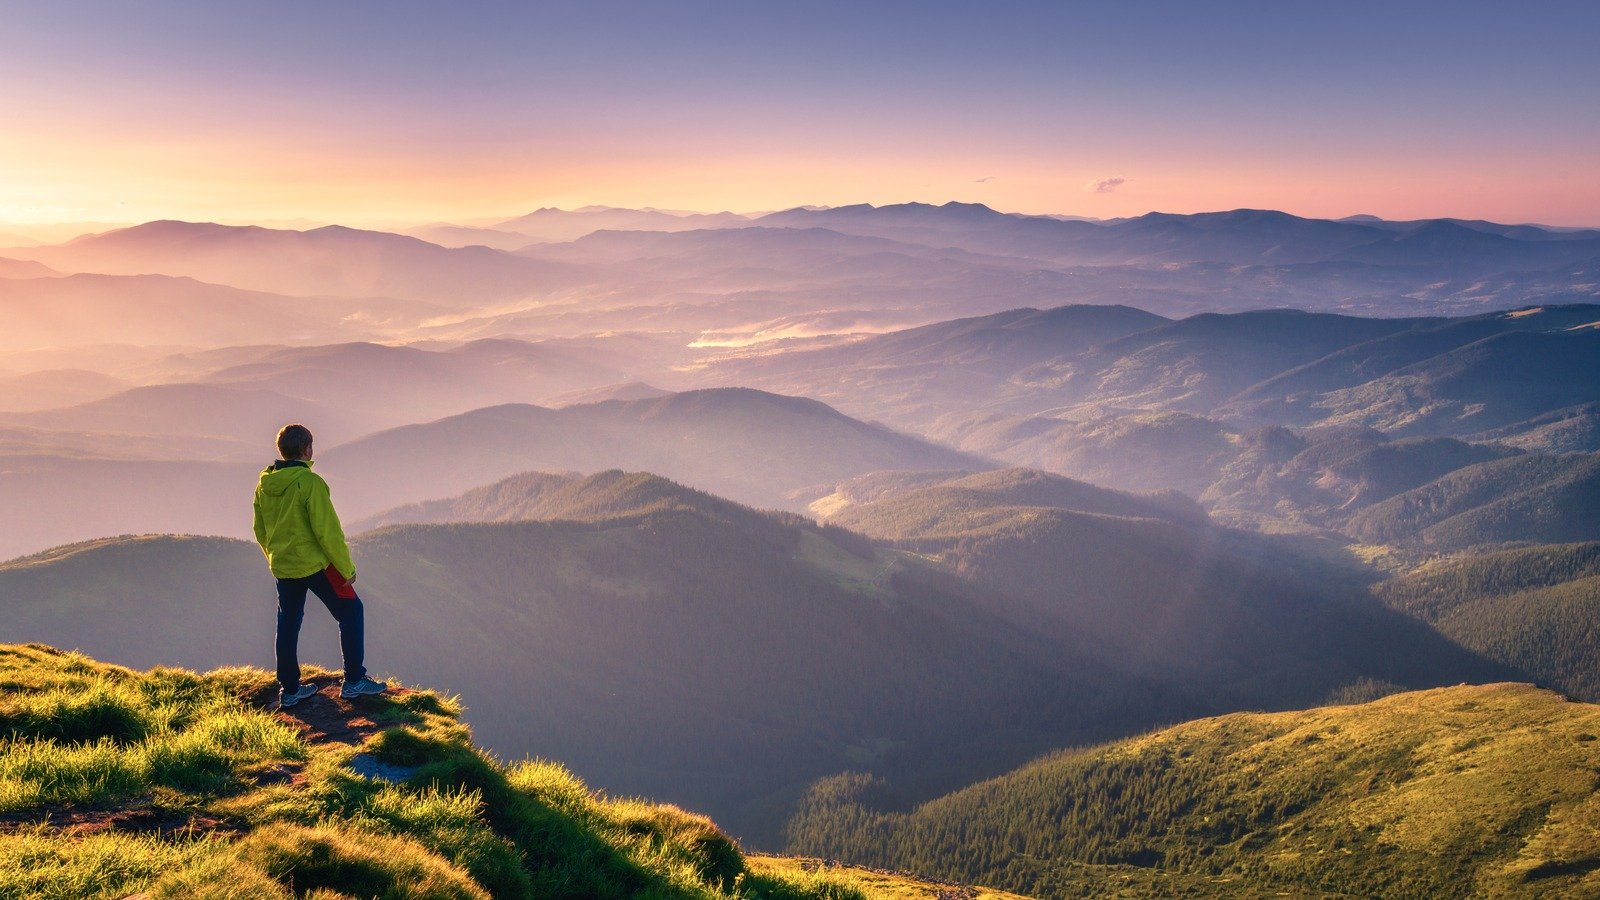 12 Tips To Help You Feel Safer While Hiking Alone